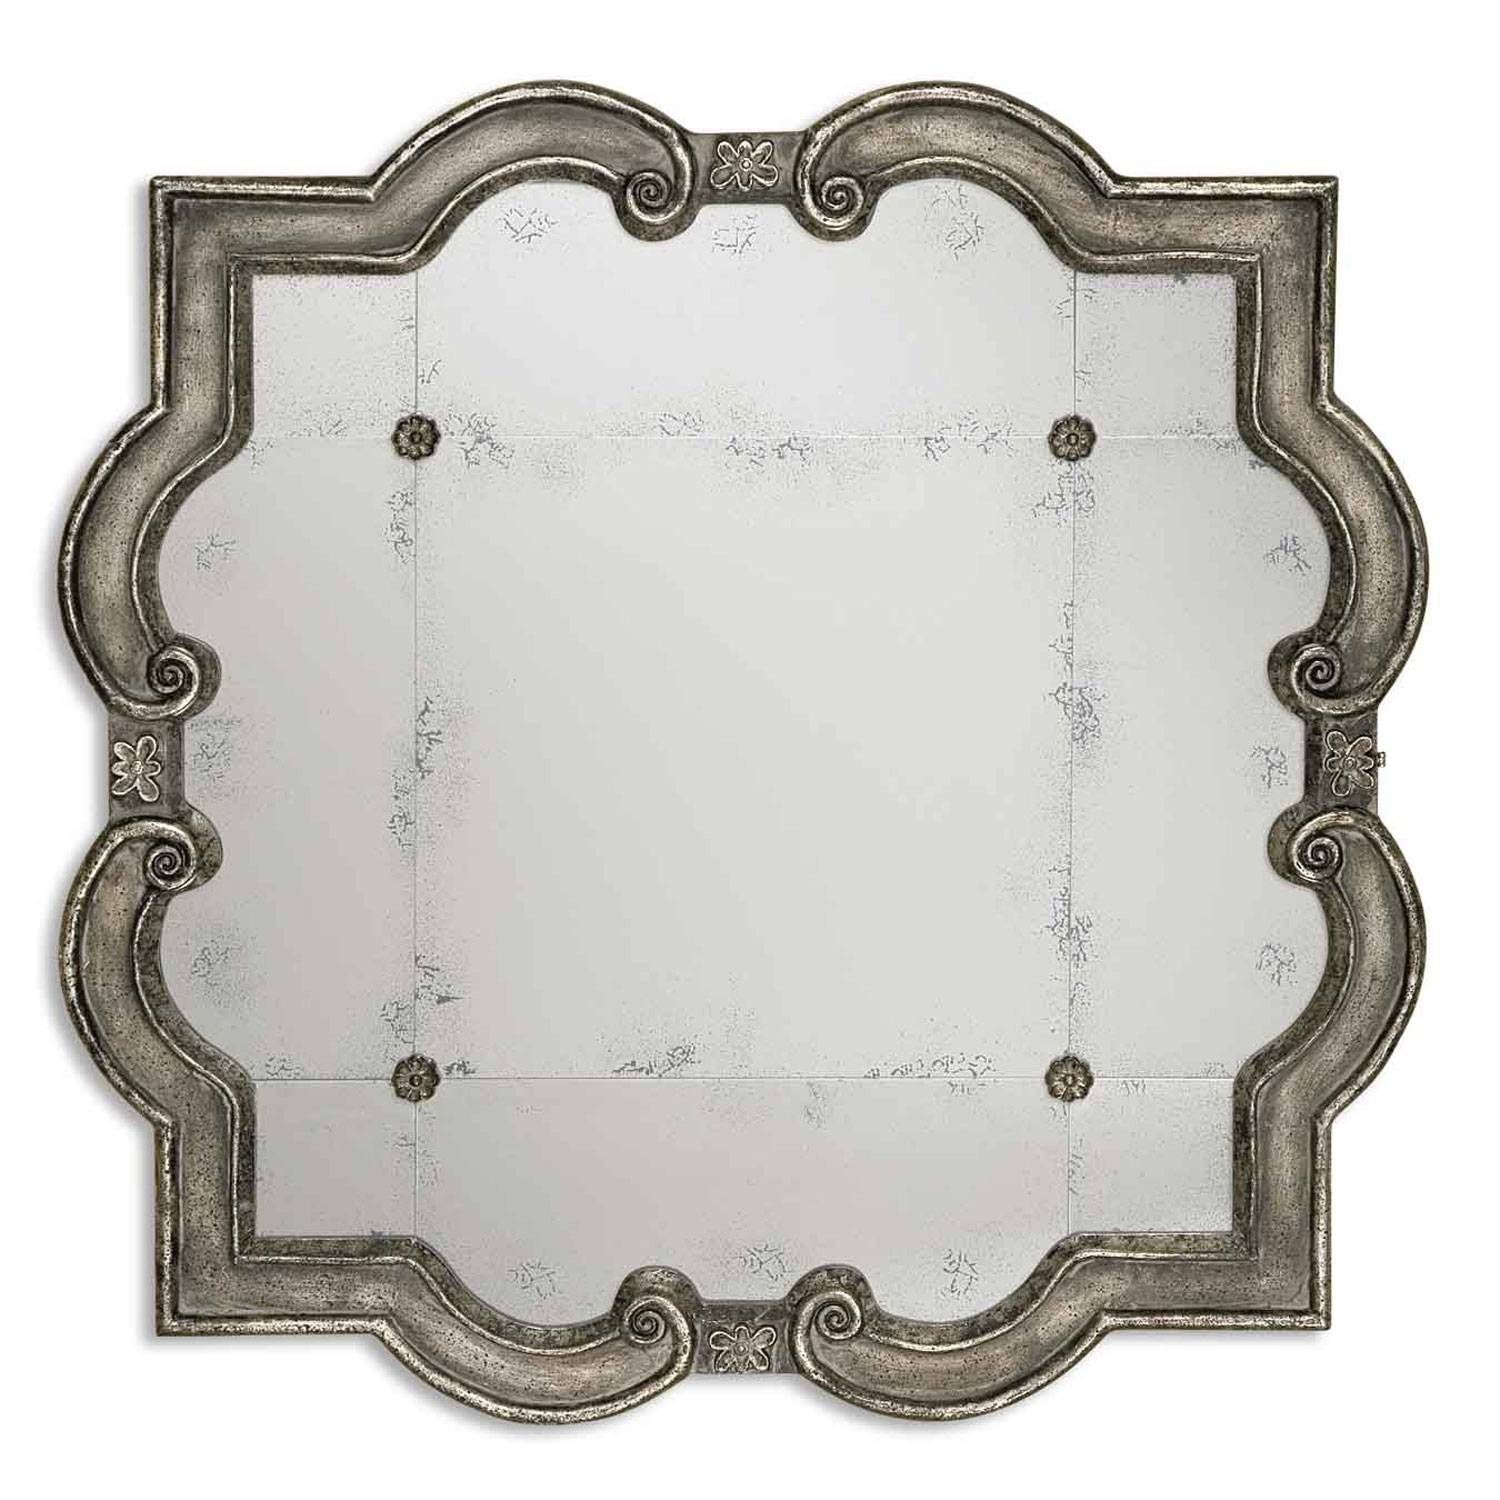 Prisca Small Mirror Uttermost Wall Mirror Mirrors Home Decor In Antique Small Mirrors (View 14 of 15)